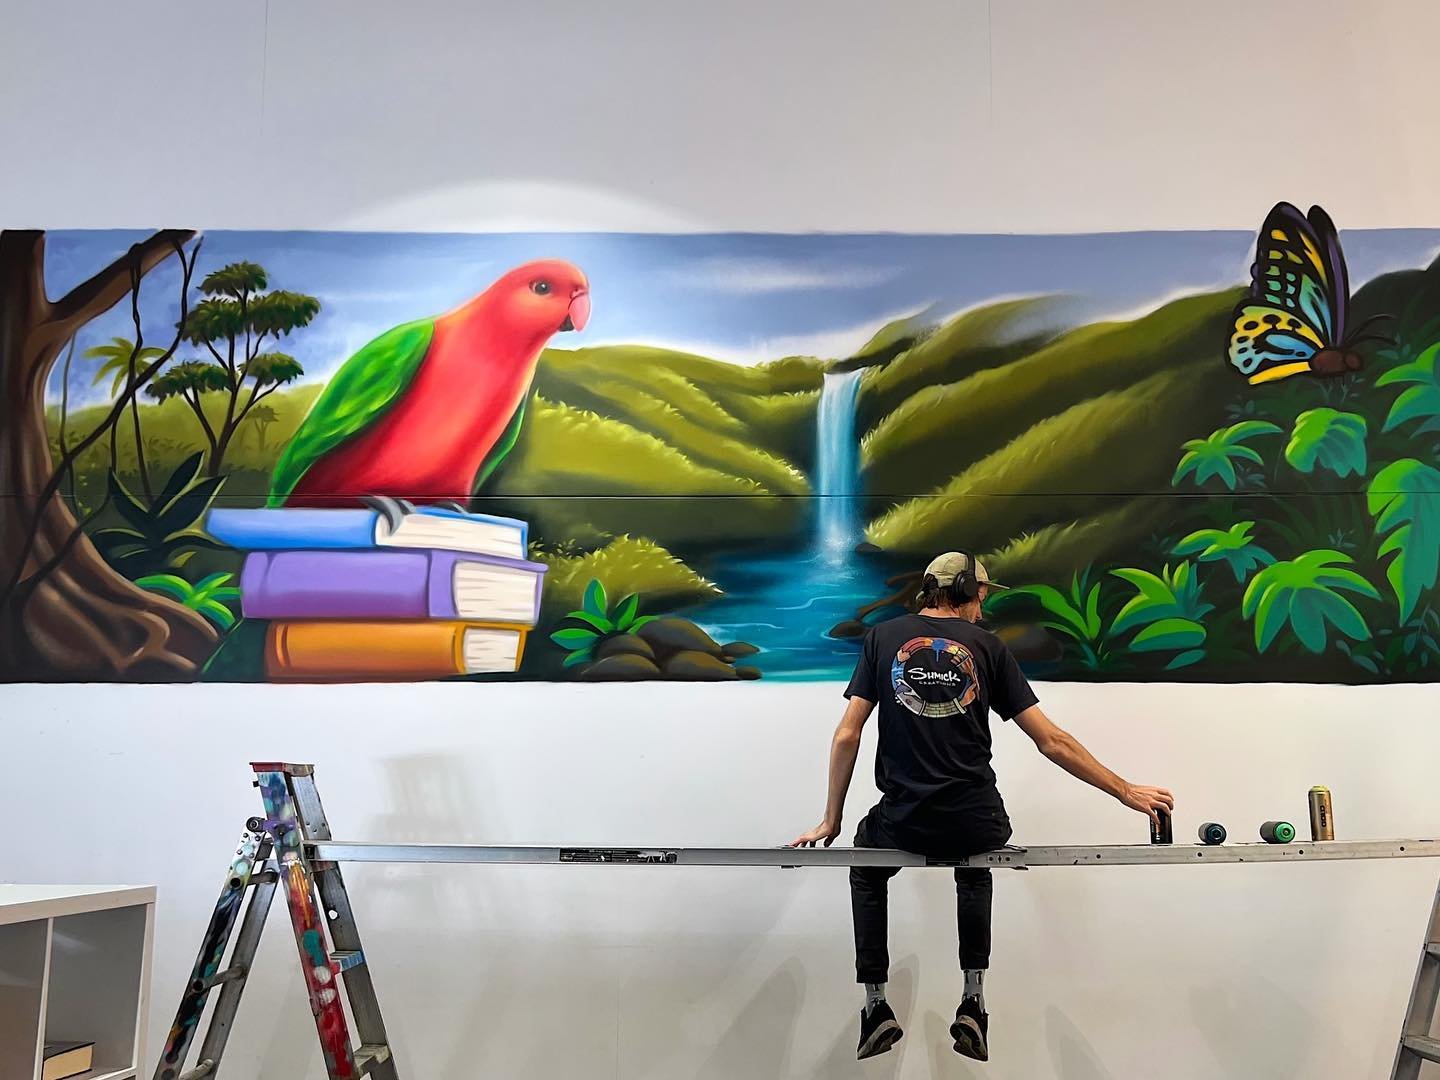 Really enjoyed creating this mural for Mount Tamborine College in the library. 📚

There is endless Inspiration out here with waterfalls and lush rainforests.

This one features a king parrot and Richmond birdwing butterfly. 

I spent some of my youn